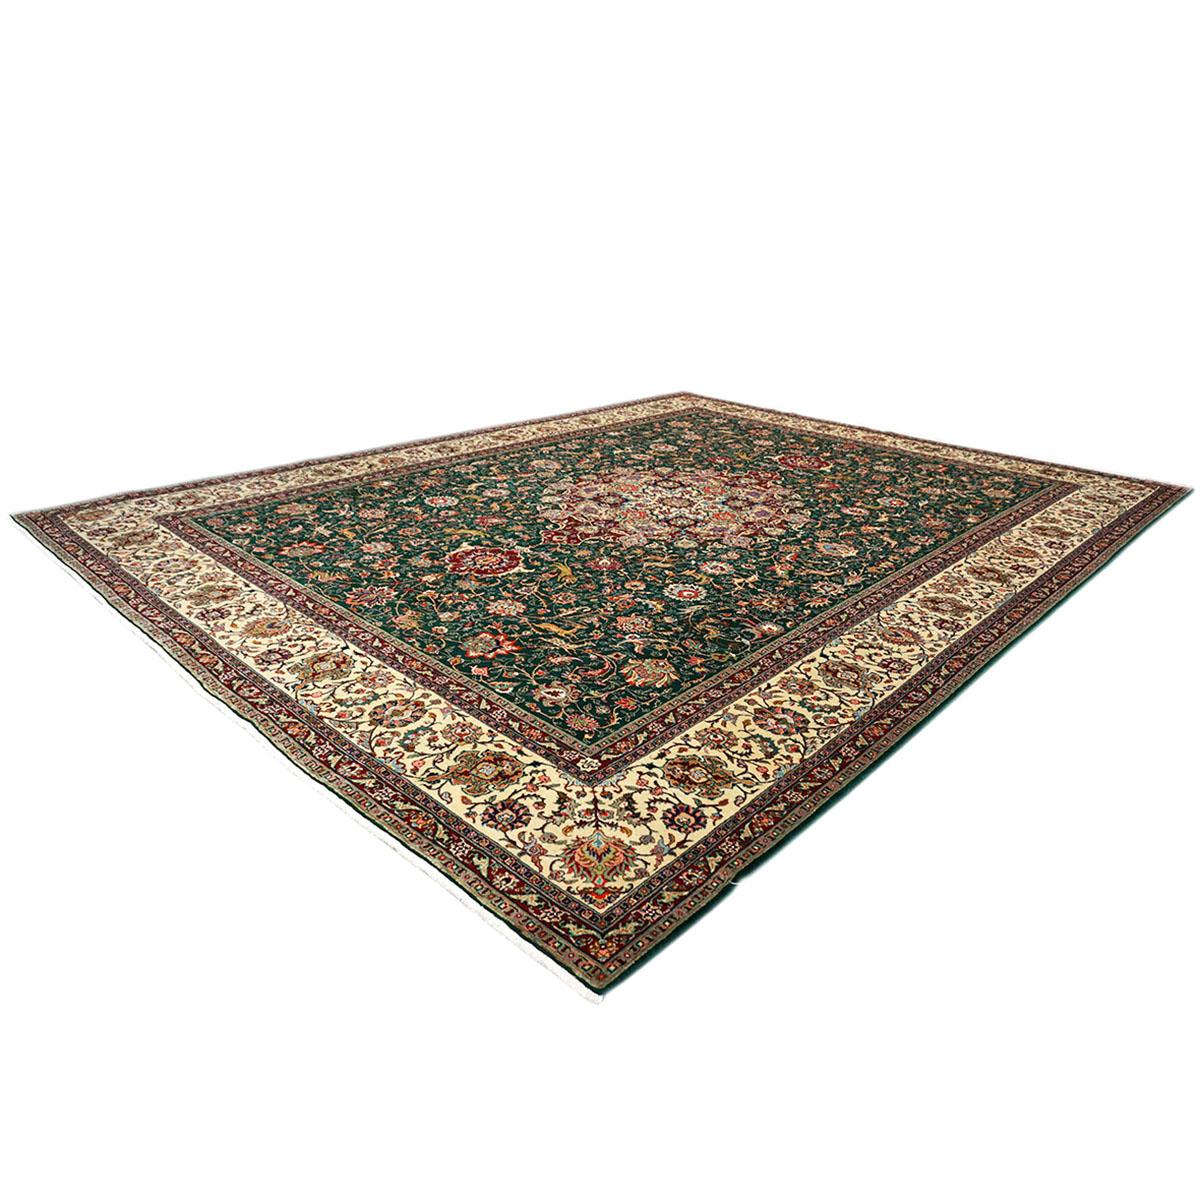 Wool Antique Persian Tabriz 9x12 Green, Red, & Ivory Handmade Area Rug For Sale